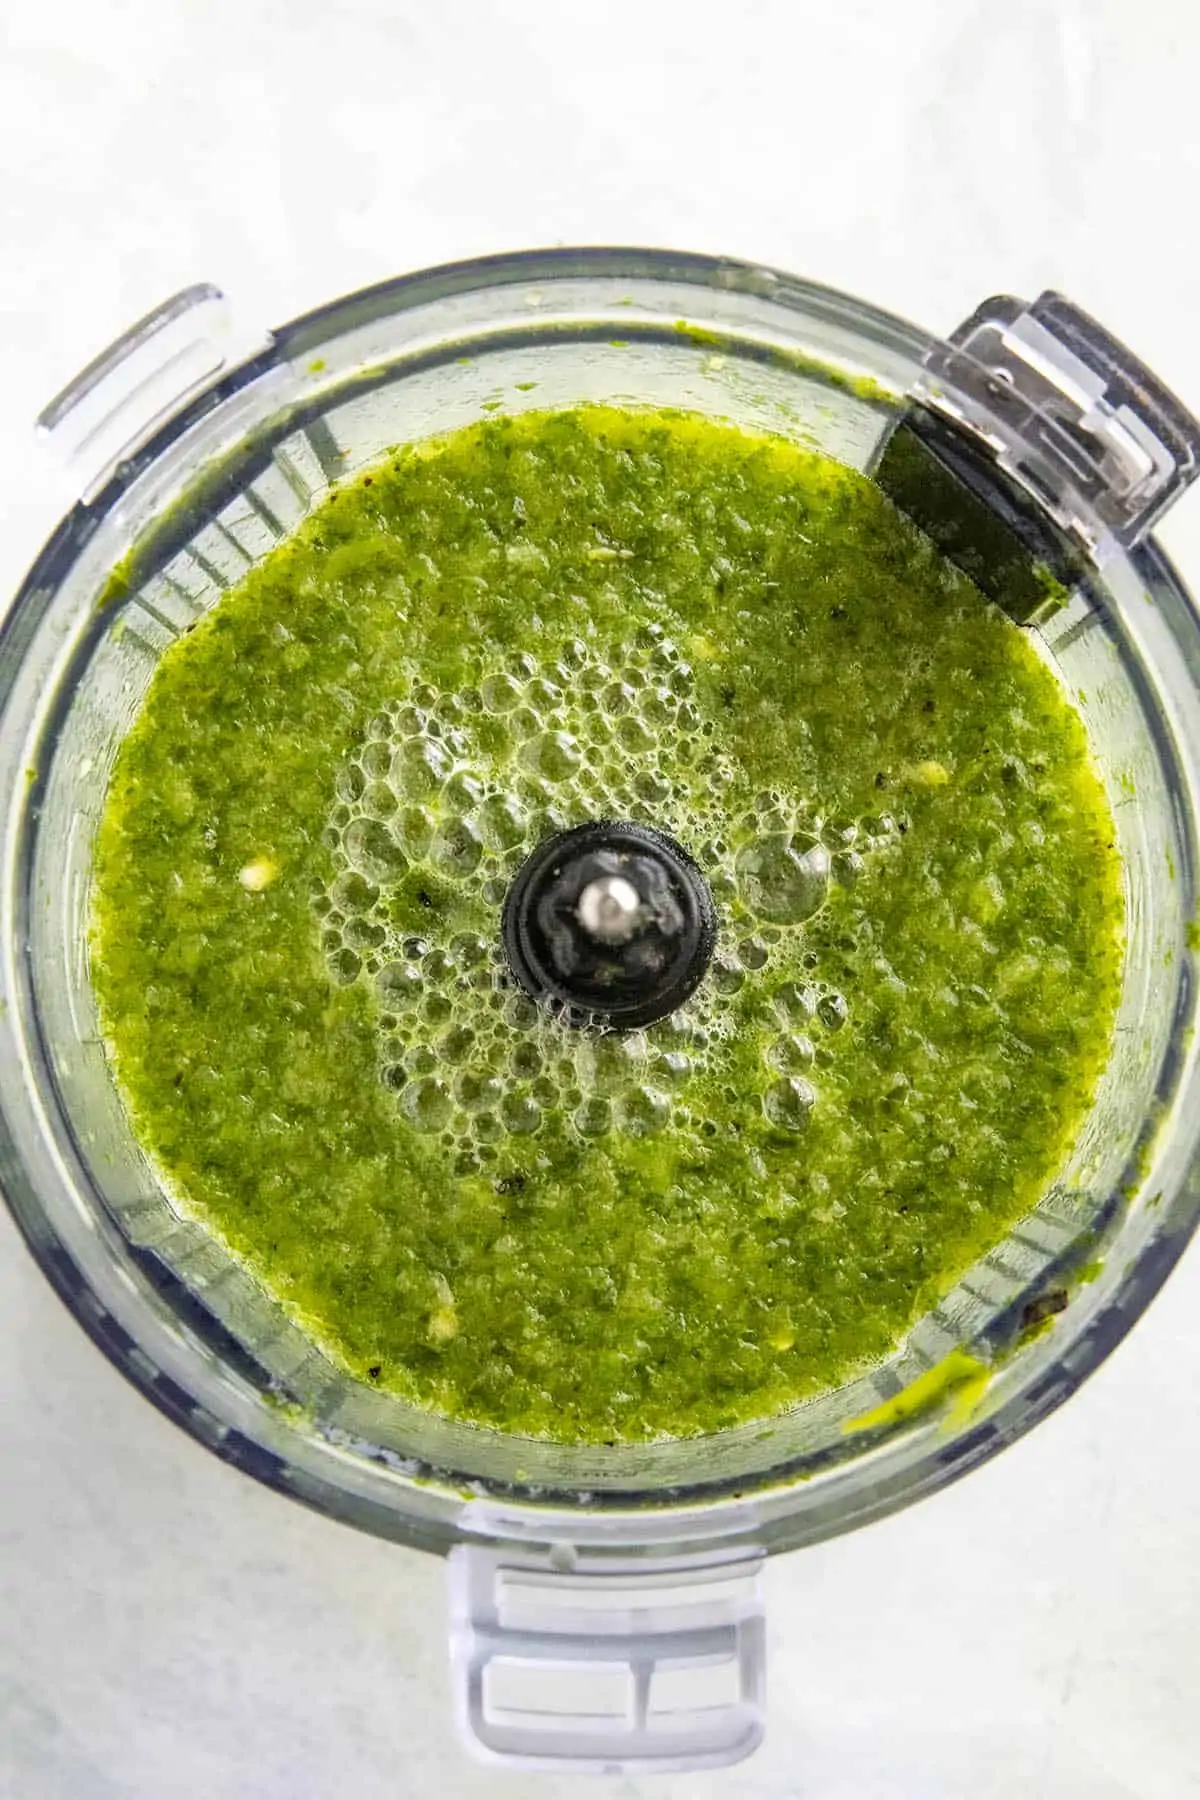 Pureed peppers and herbs in a food processor